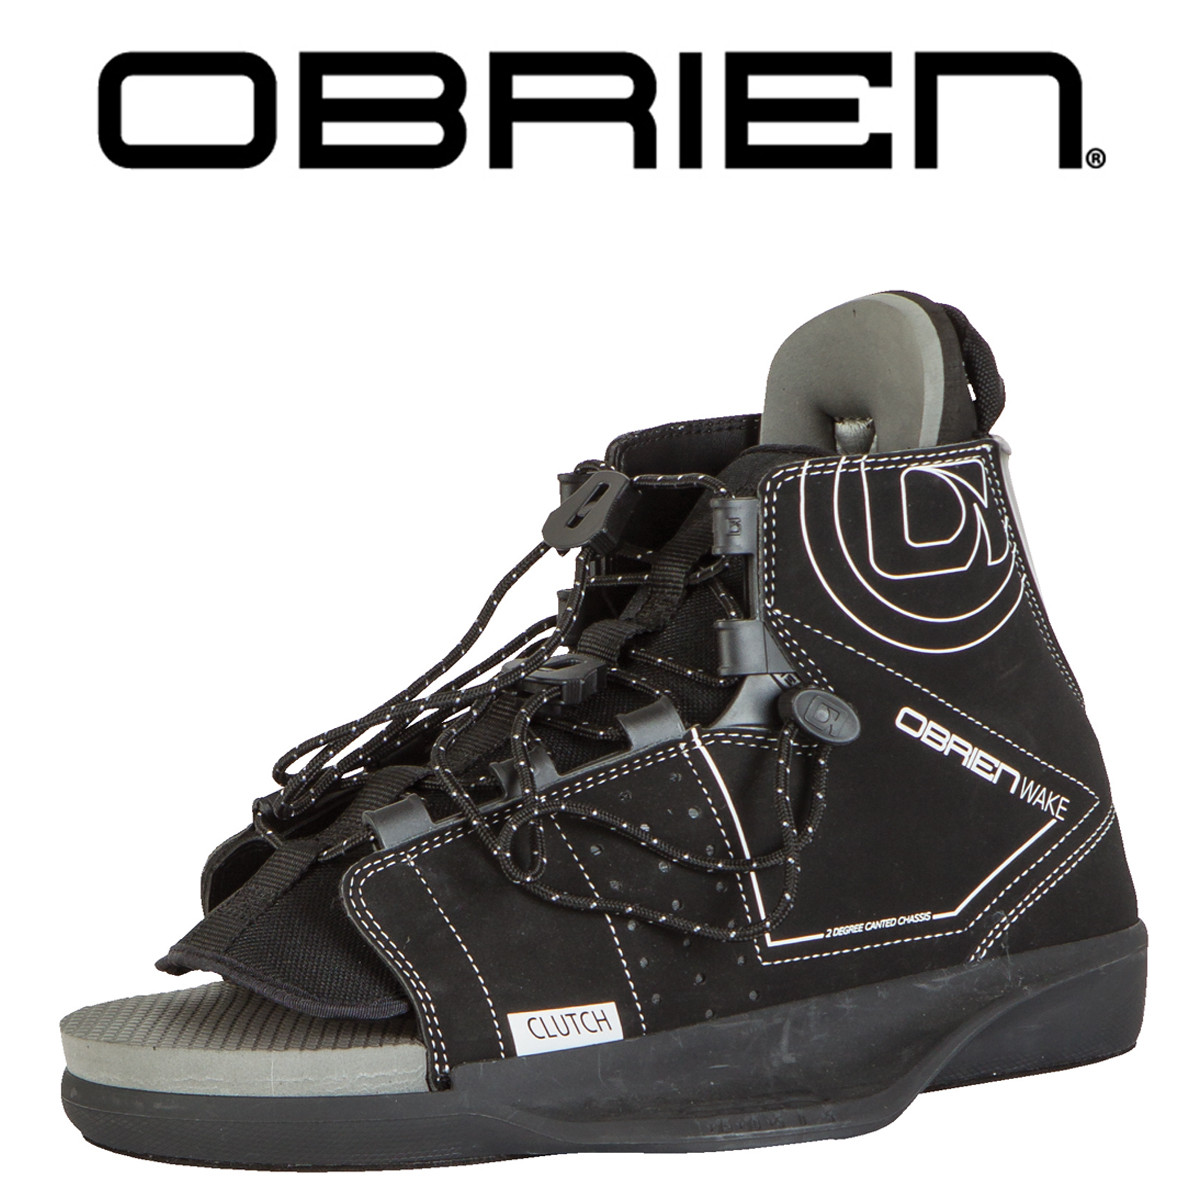 O'Brien Clutch Wakeboard Bindings for the Lowest Price at RIDE THE WAVE